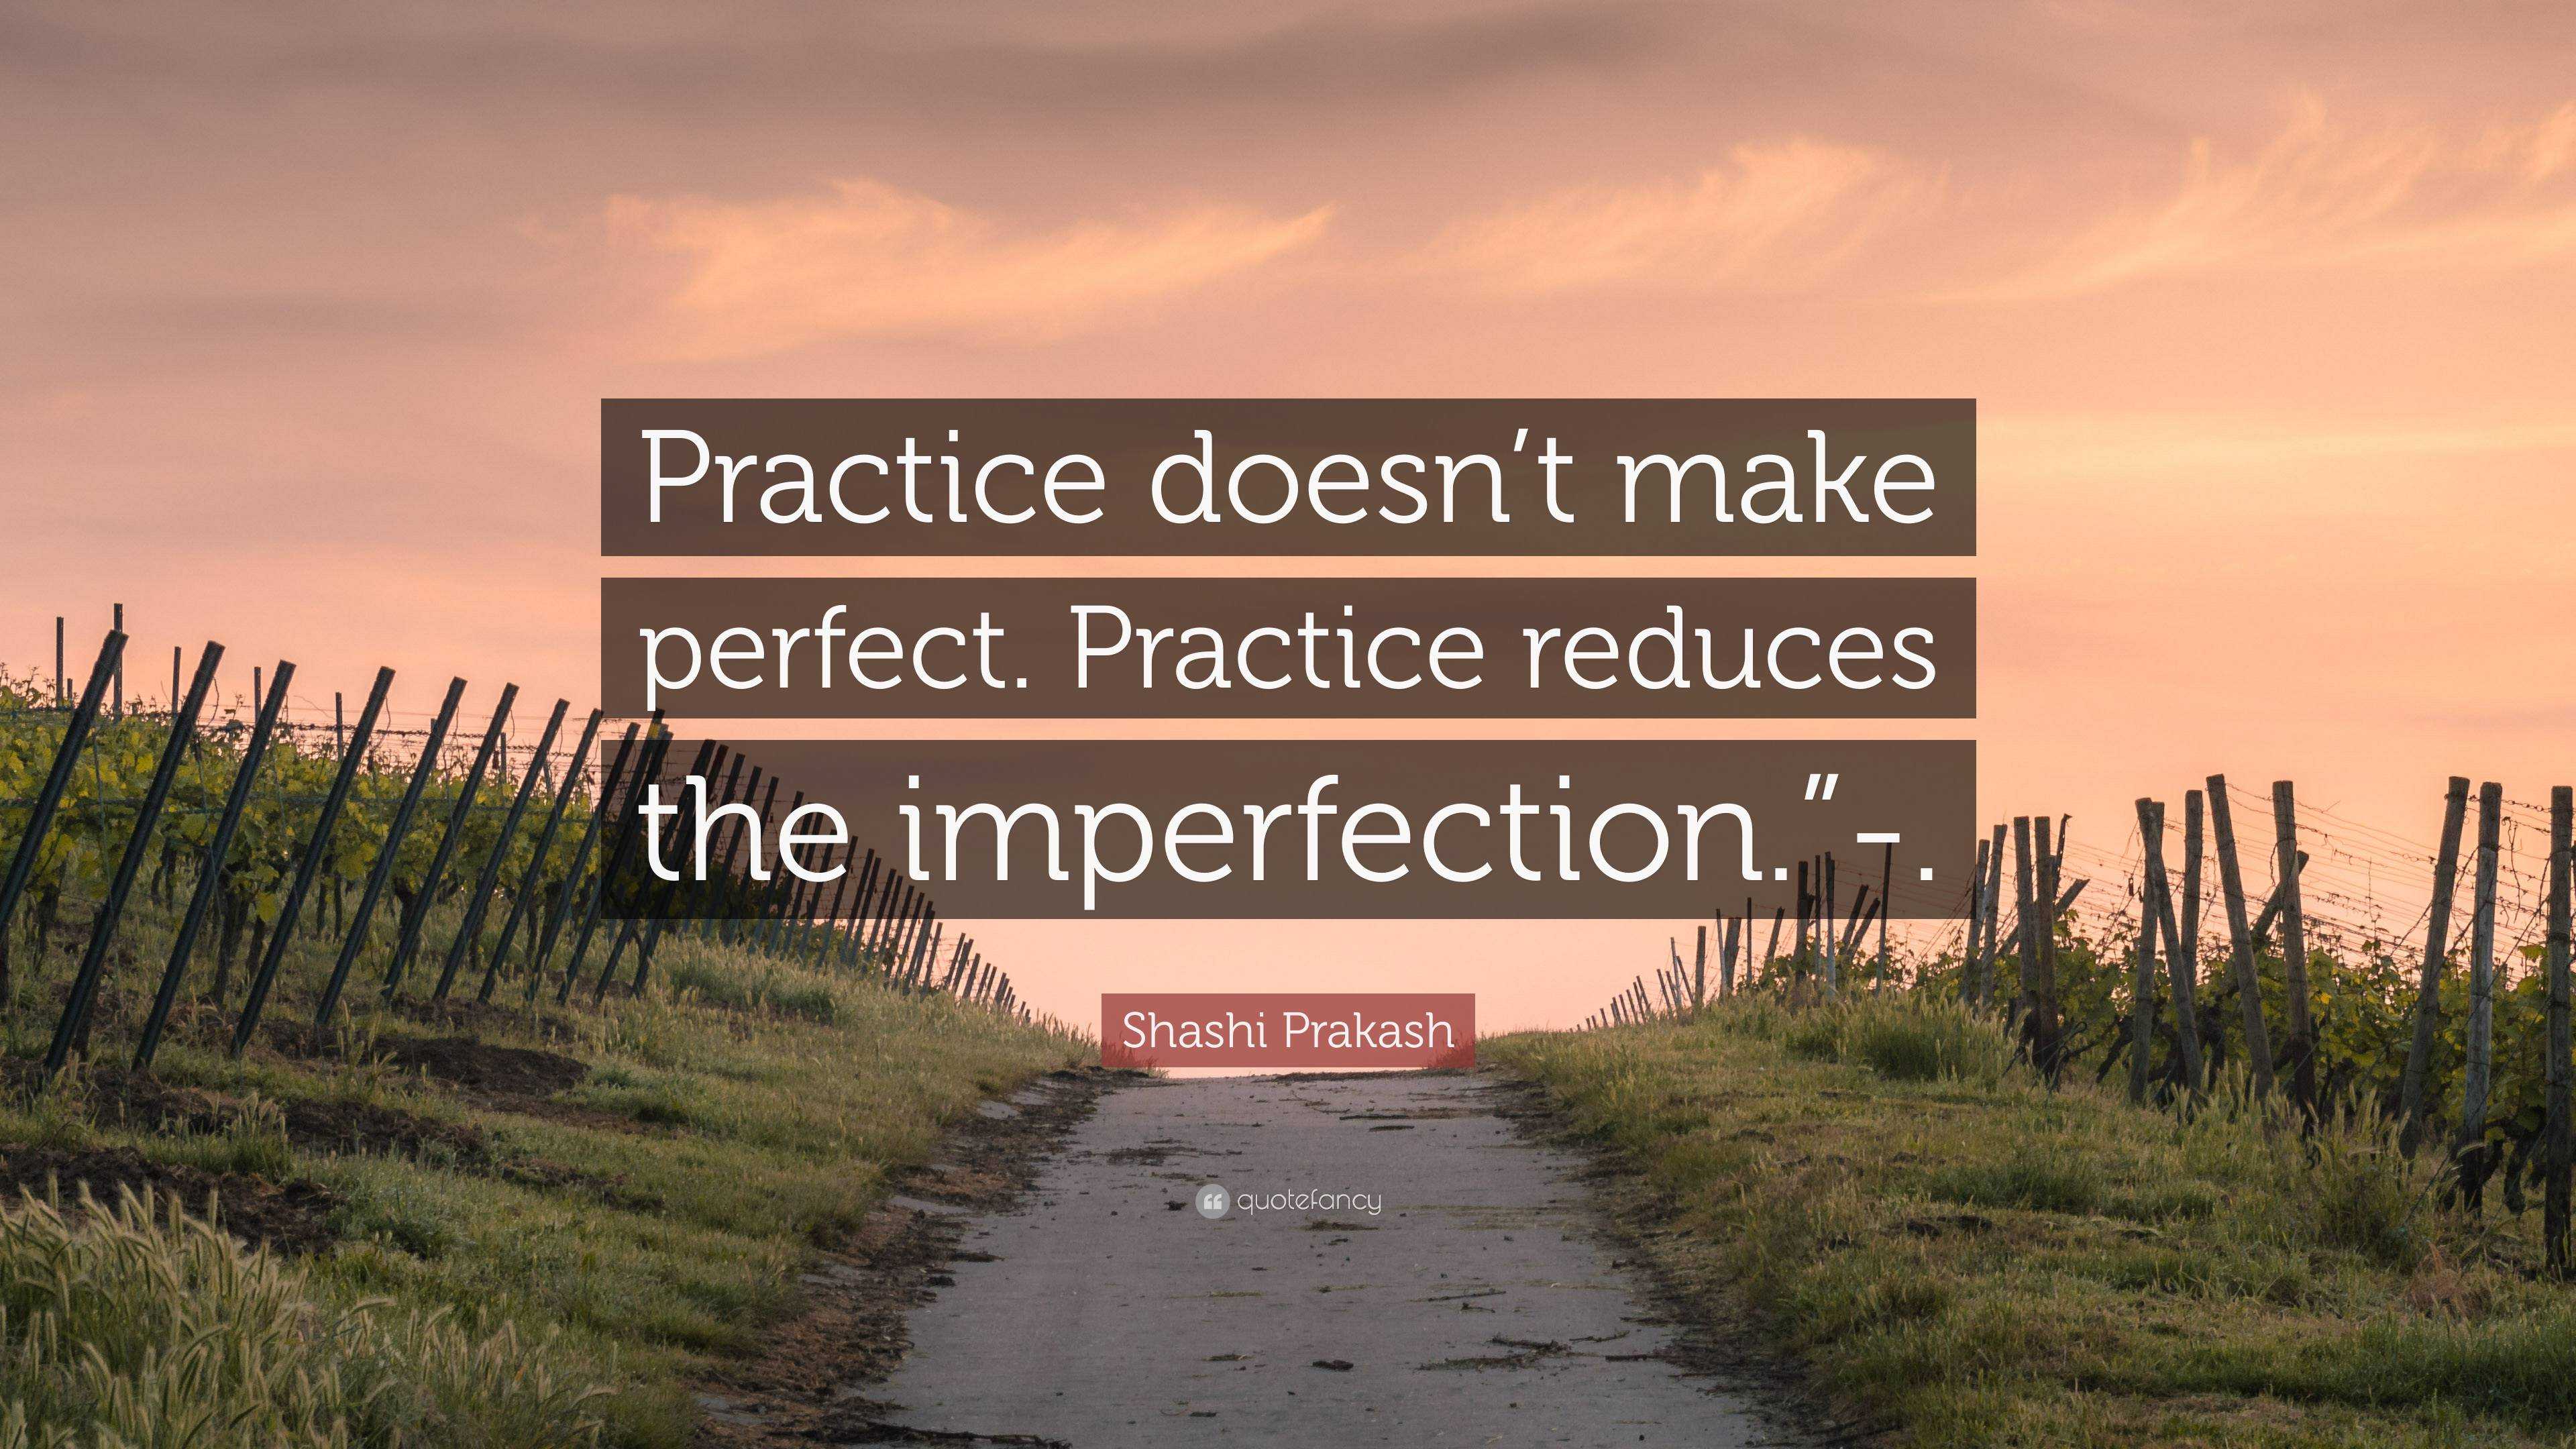 Comment: Practice does not make perfect